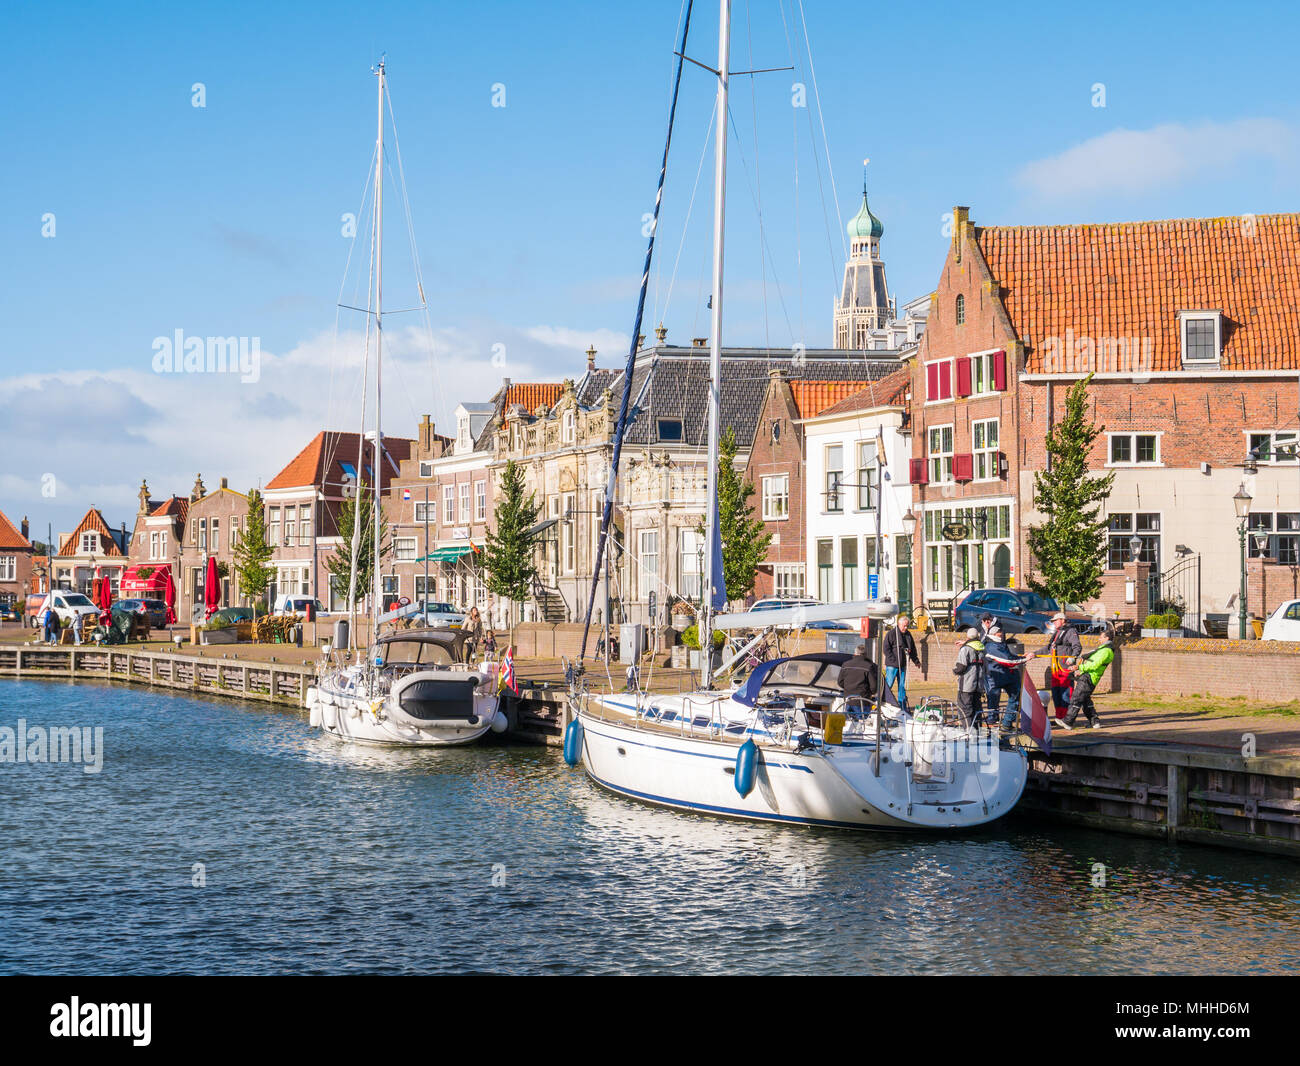 People and sailboats on canal in old town of Enkhuizen, North Holland, Netherlands Stock Photo